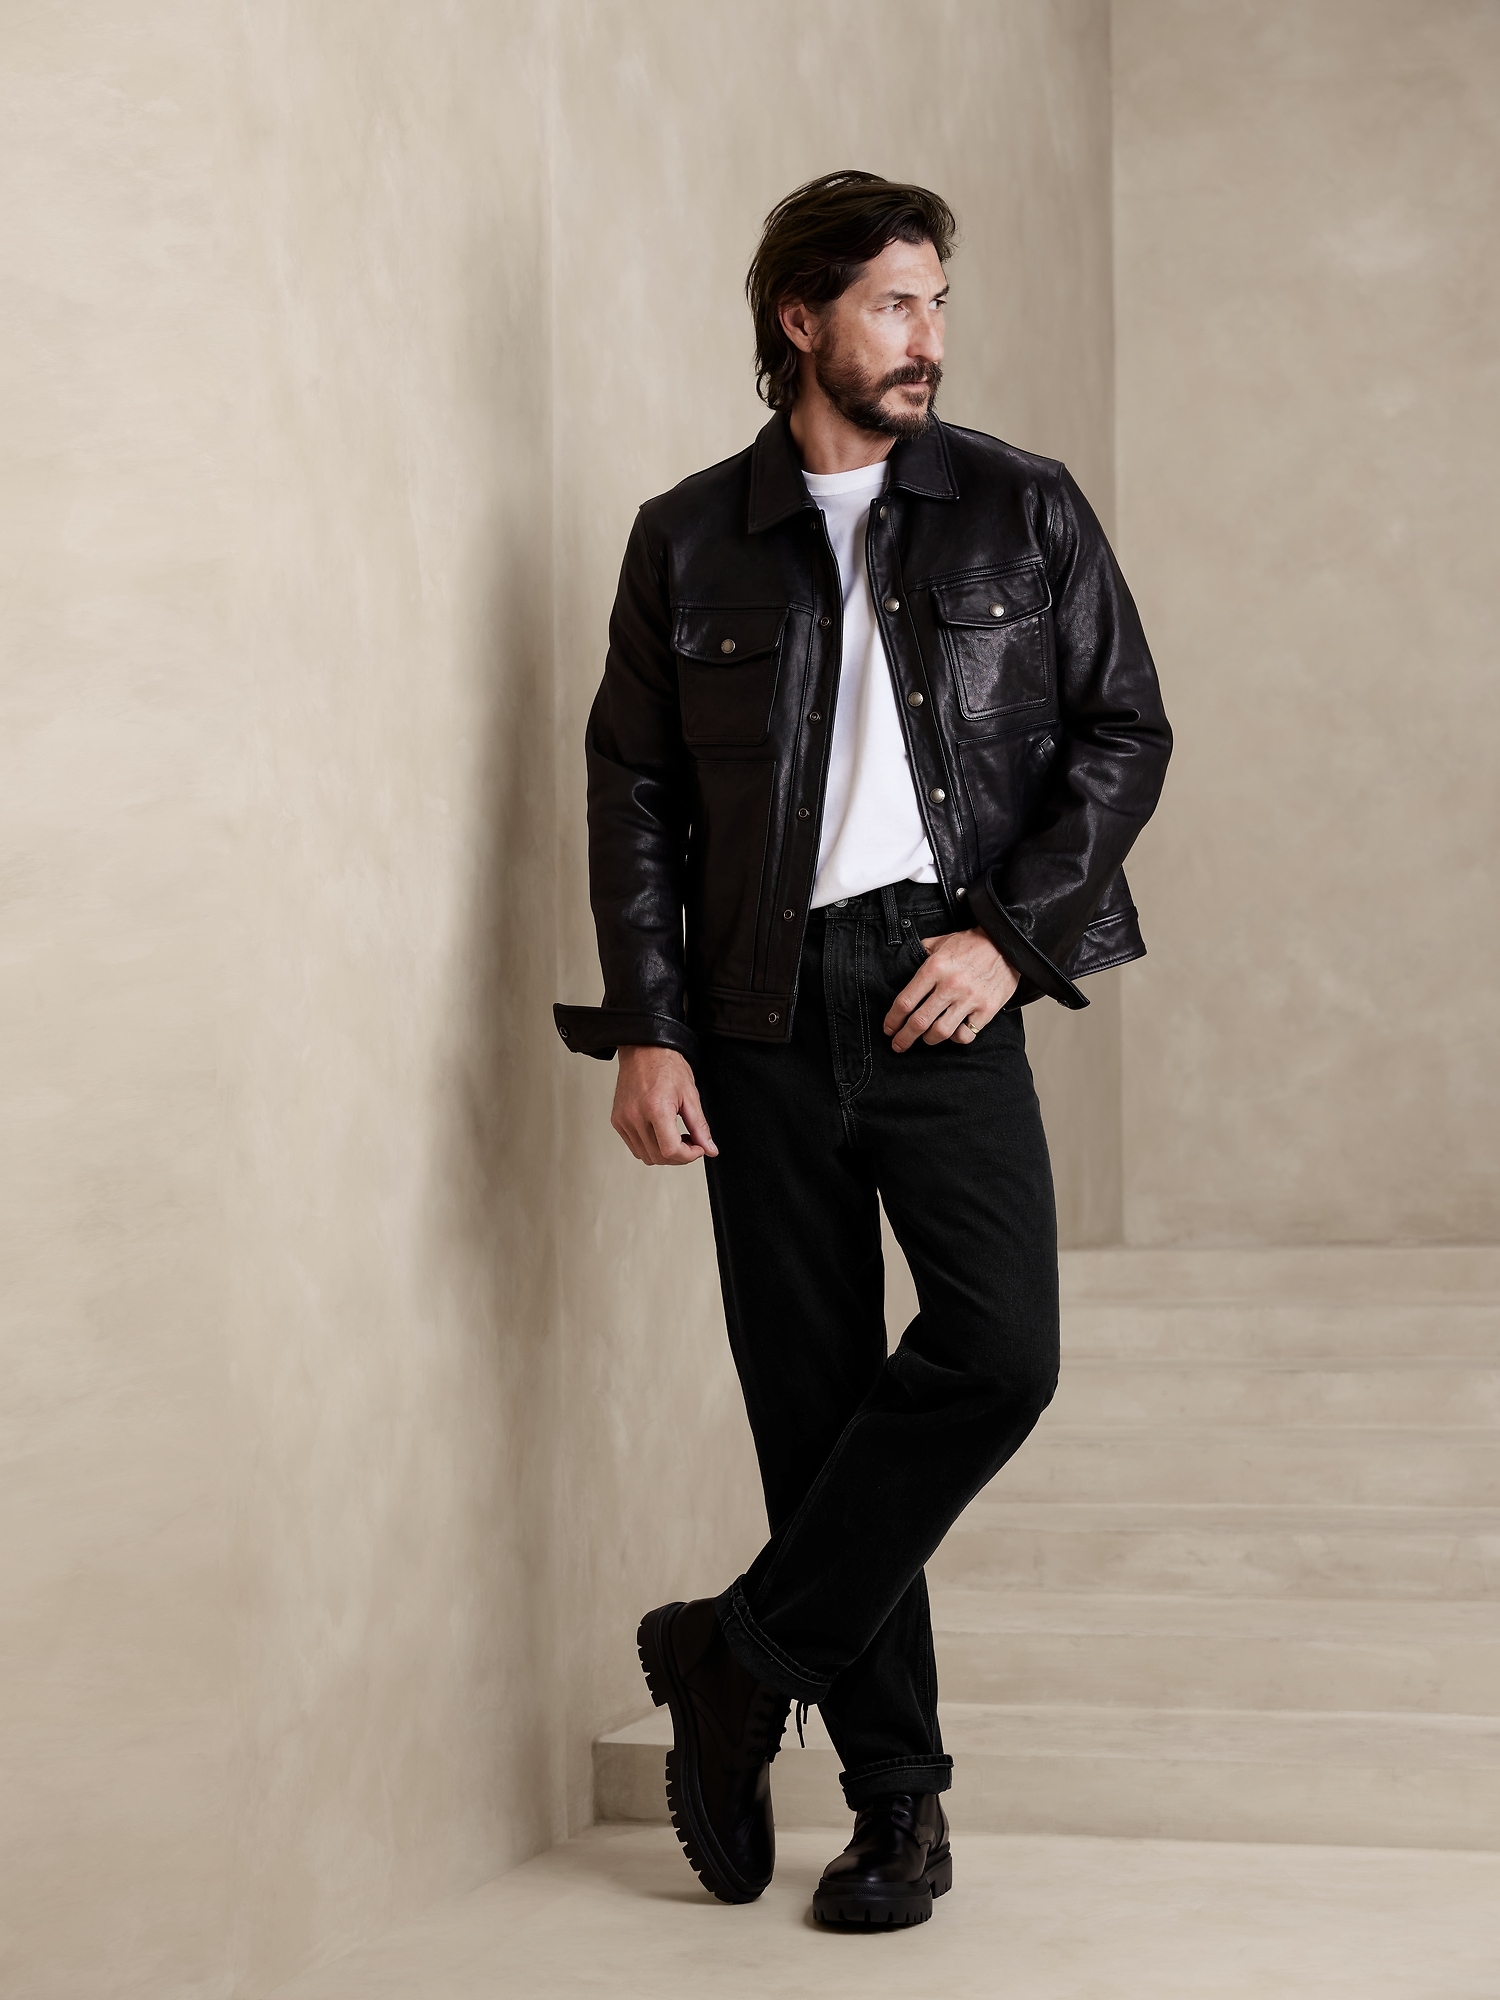 Banana Republic: 40% Off Sale Styles + Extra 30% Off Sale Styles + Free Shipping on $39+